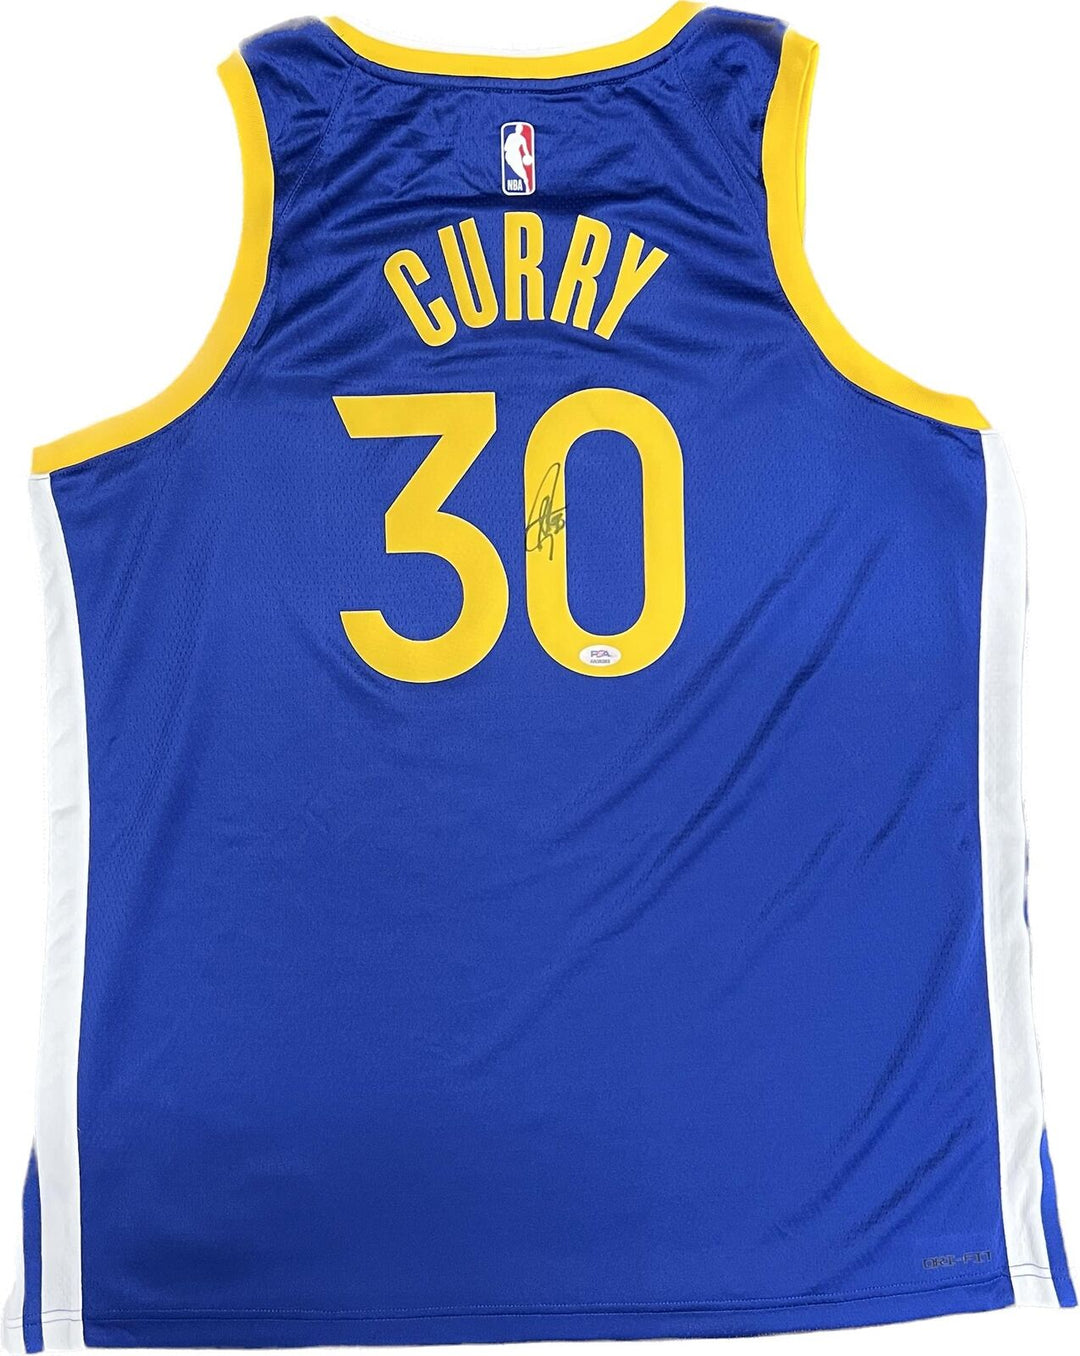 Stephen Curry signed jersey PSA/DNA Golden State Warriors Autographed Image 1